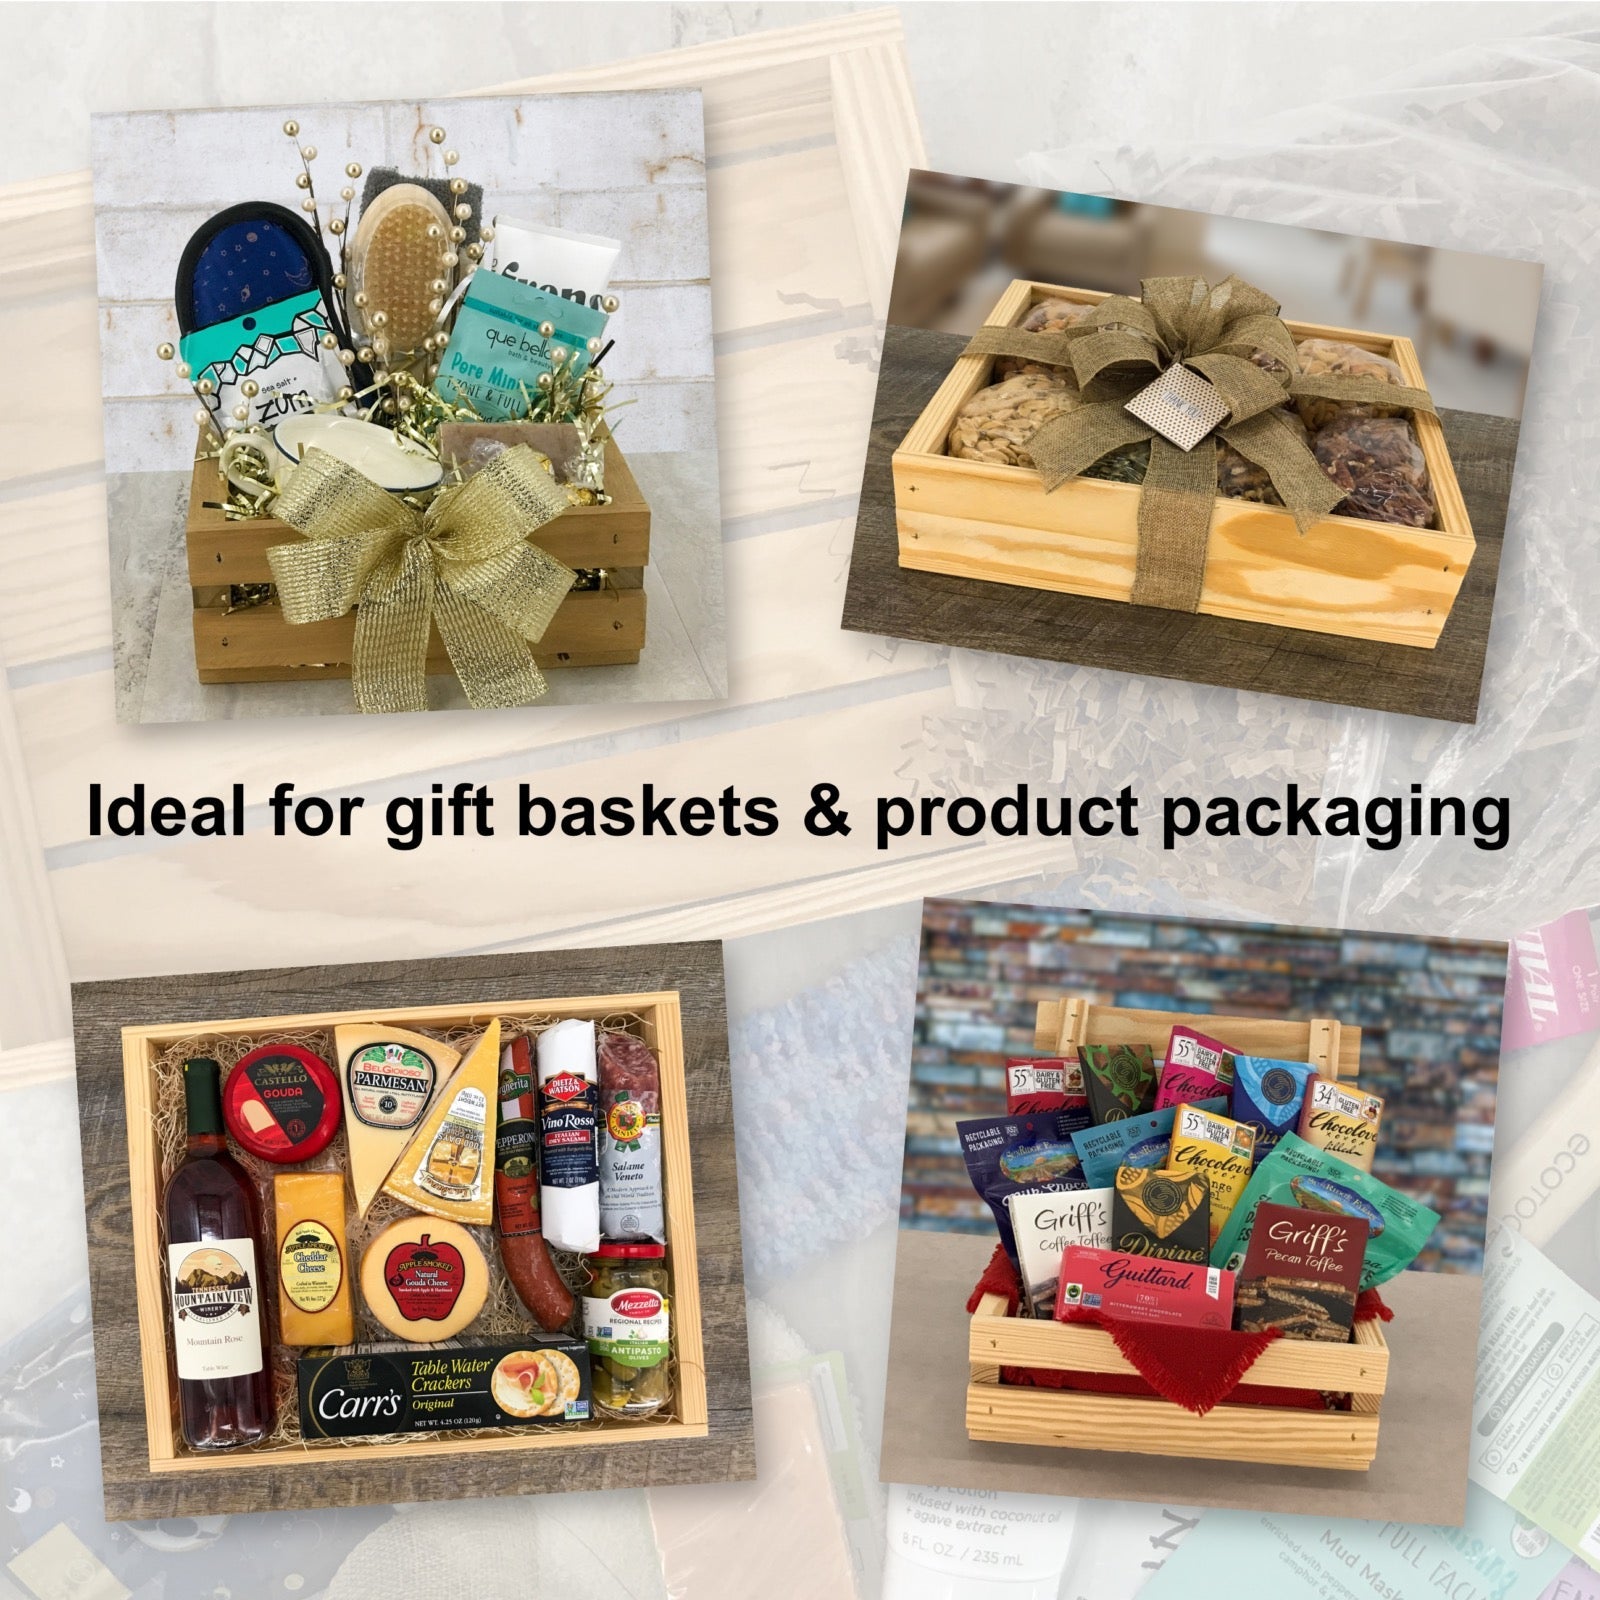 Ideal for gift baskets and product packaging, SS-16-14-3.5-NX-NW-NL, 6-SS-16-14-3.5-NX-NW-NL, 12-SS-16-14-3.5-NX-NW-NL, 24-SS-16-14-3.5-NX-NW-NL, 48-SS-16-14-3.5-NX-NW-NL, 96-SS-16-14-3.5-NX-NW-NL